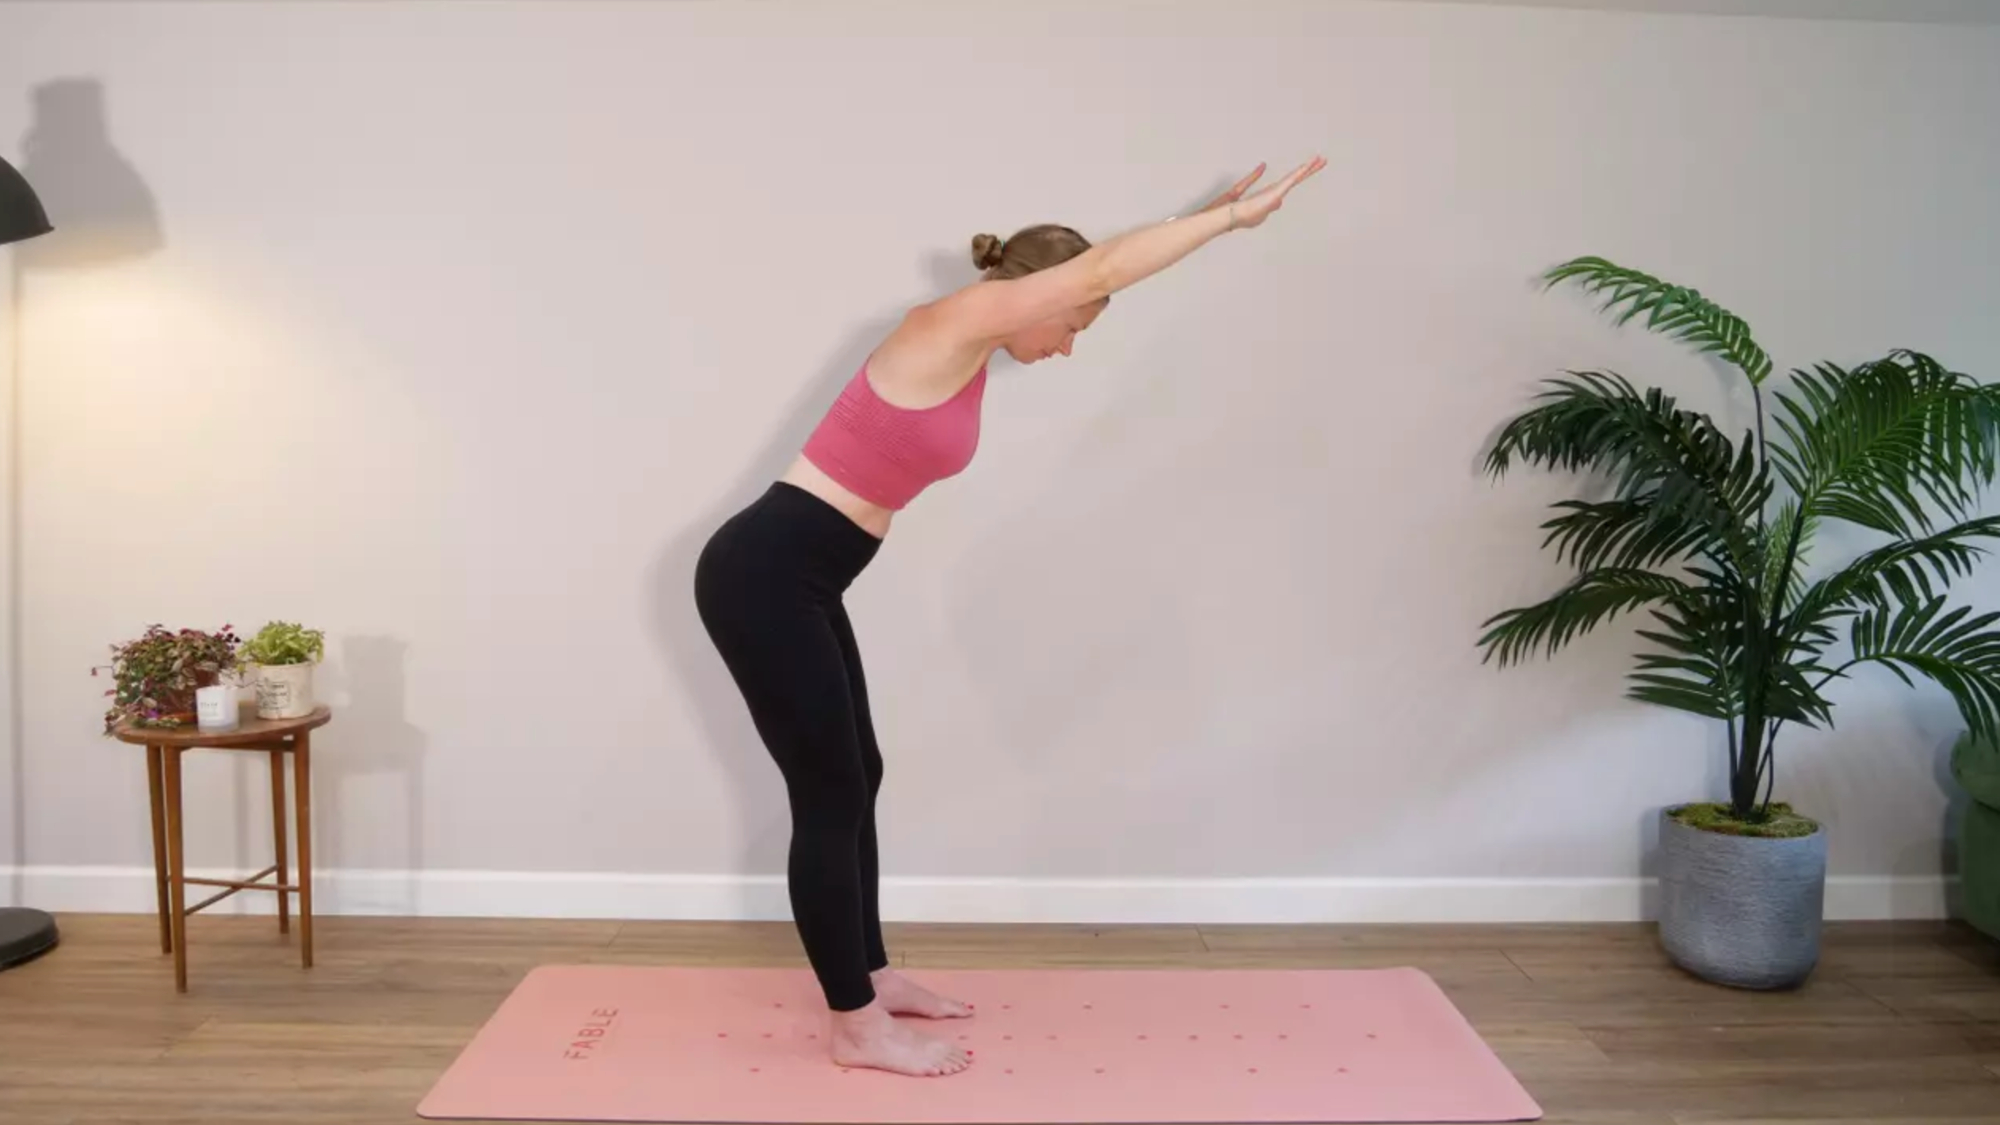 Pilates for posture routine to strengthen muscles and reduce pain | Fit ...